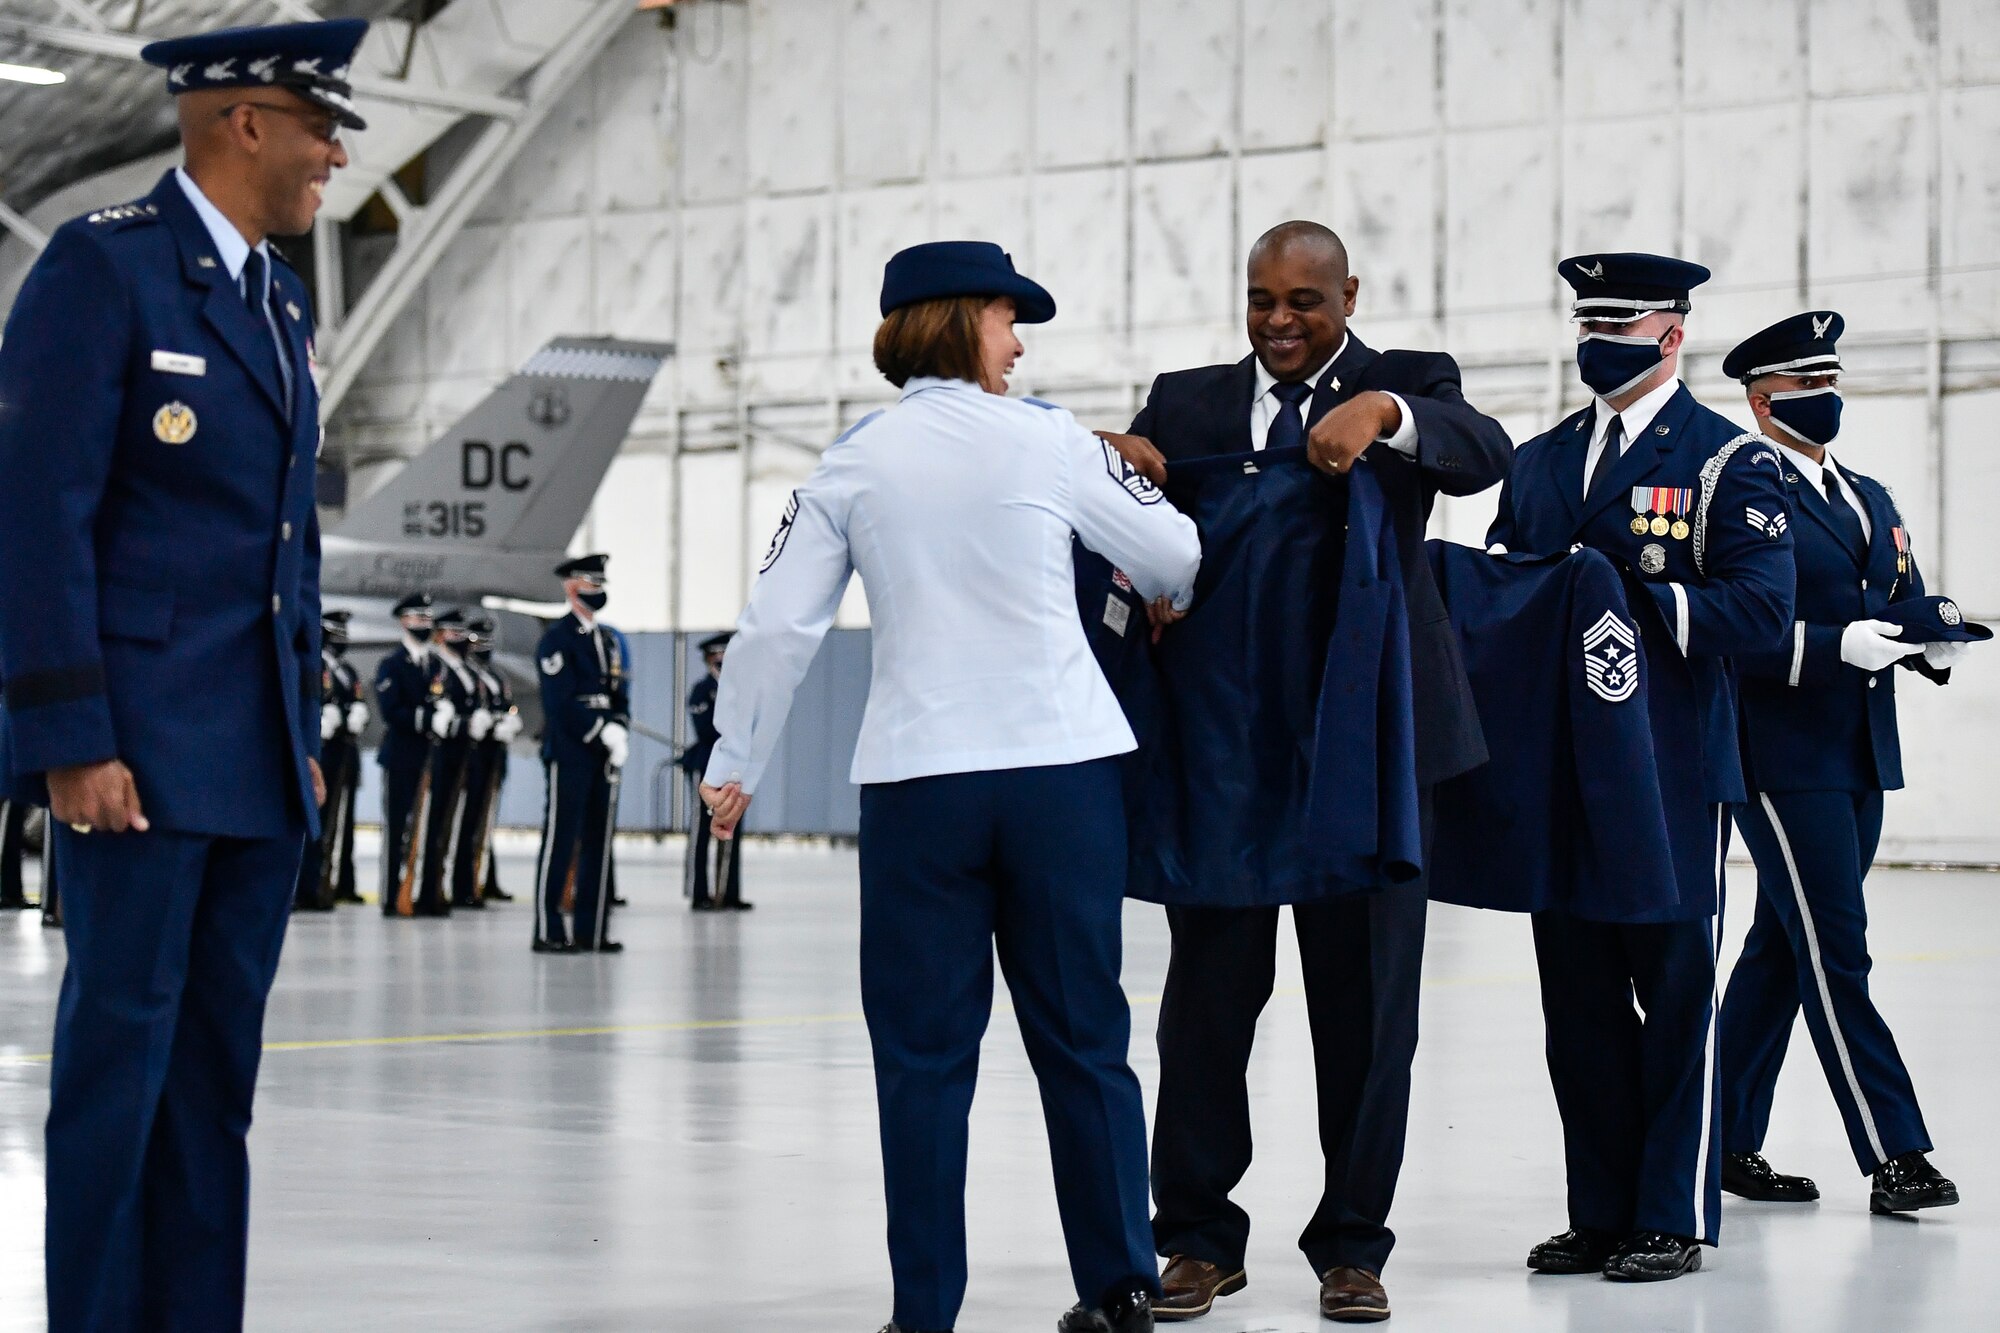 CMSgt Bass installed as the Air Force’s 19th Chief Master Sergeant